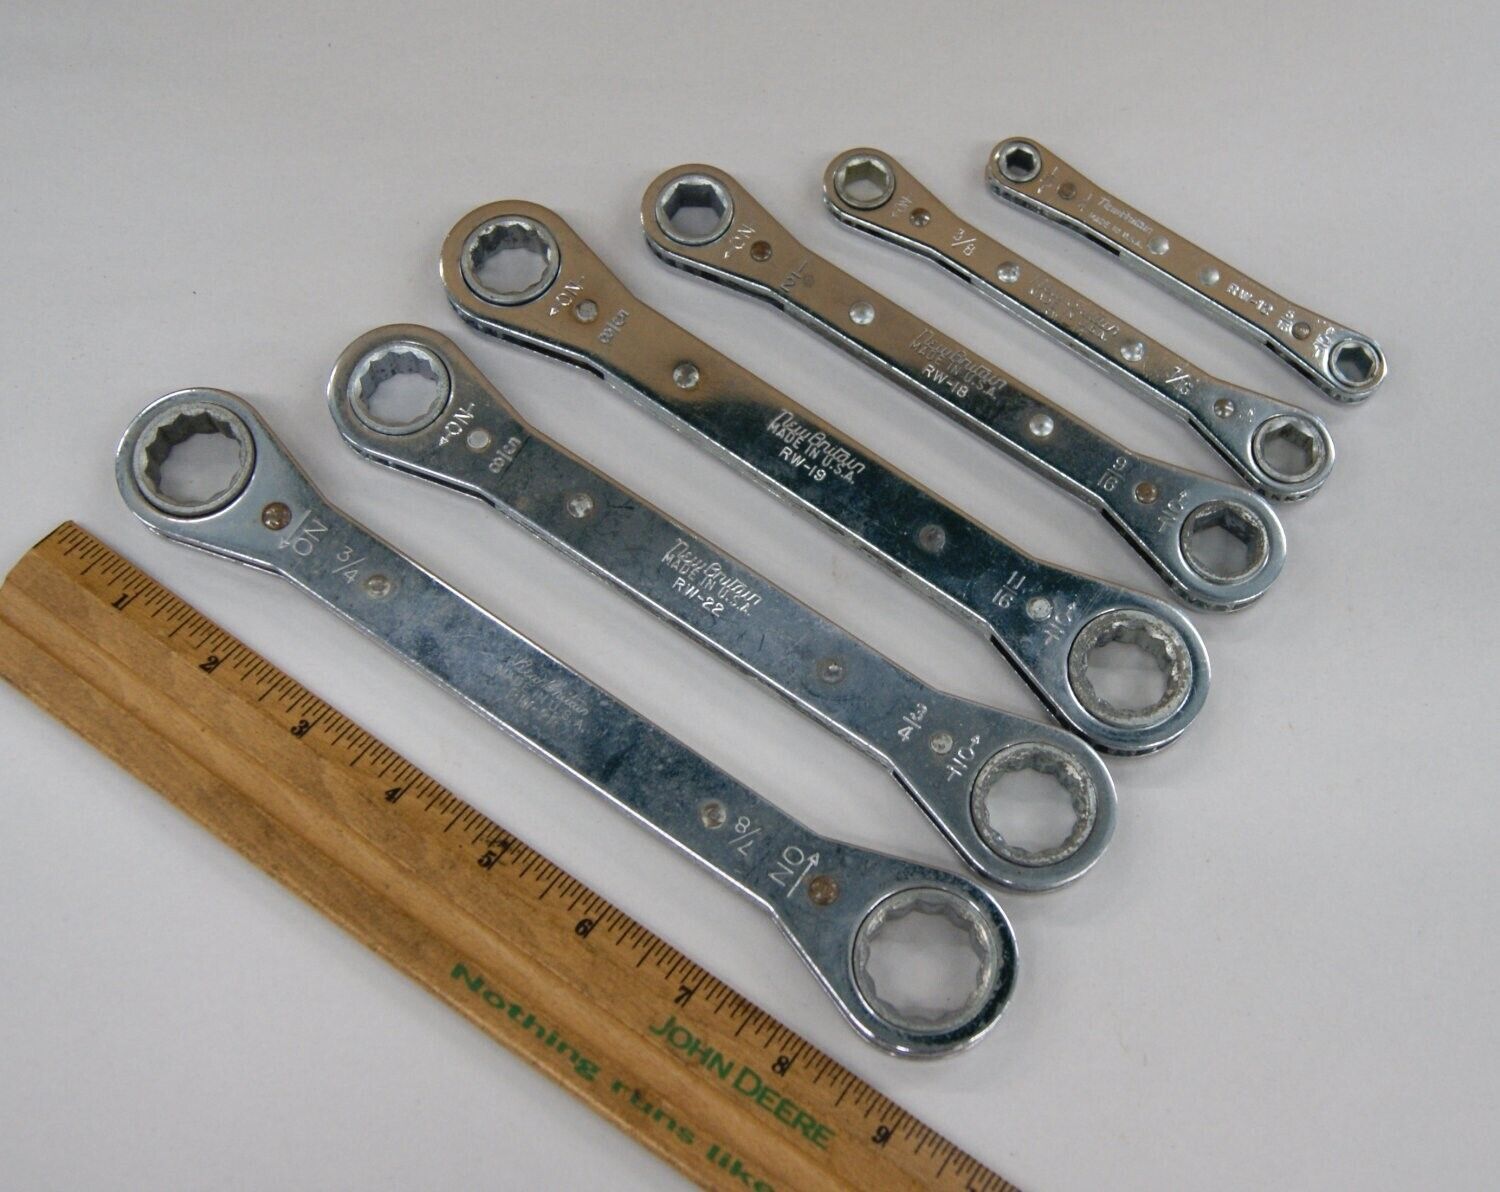 New Britain USA 6 pc, 6 & 12 Pt Ratcheting Wrench Set, 1/4 - 7/8 inch VGC BN2771